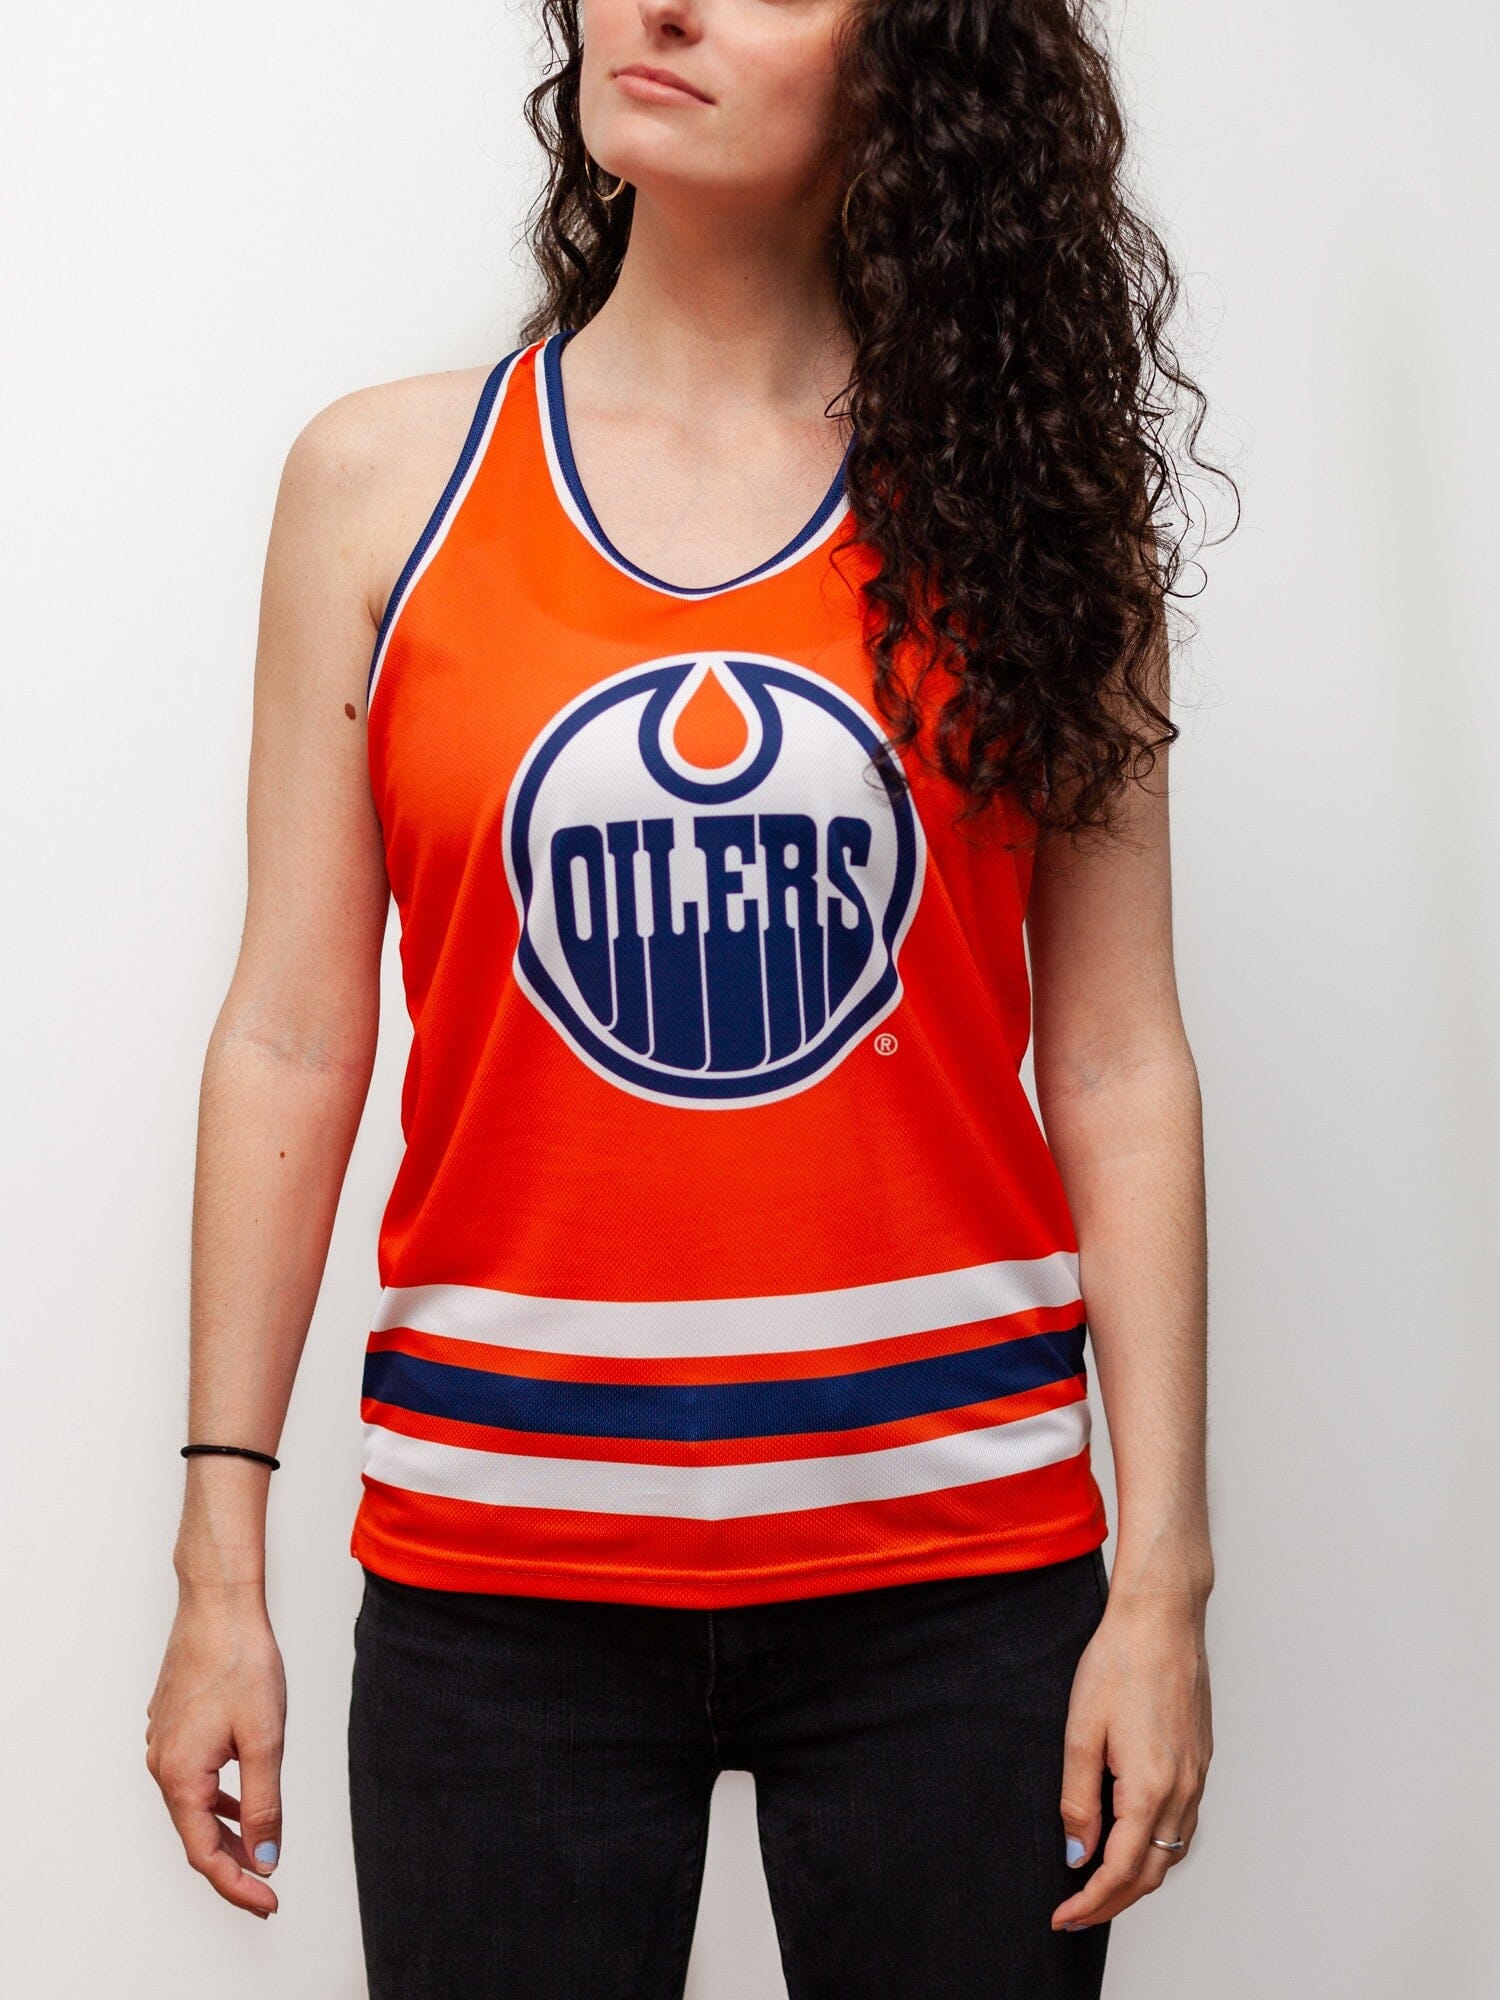 Edmonton Oilers on X: Holiday shopping?! The #Oilers Store will